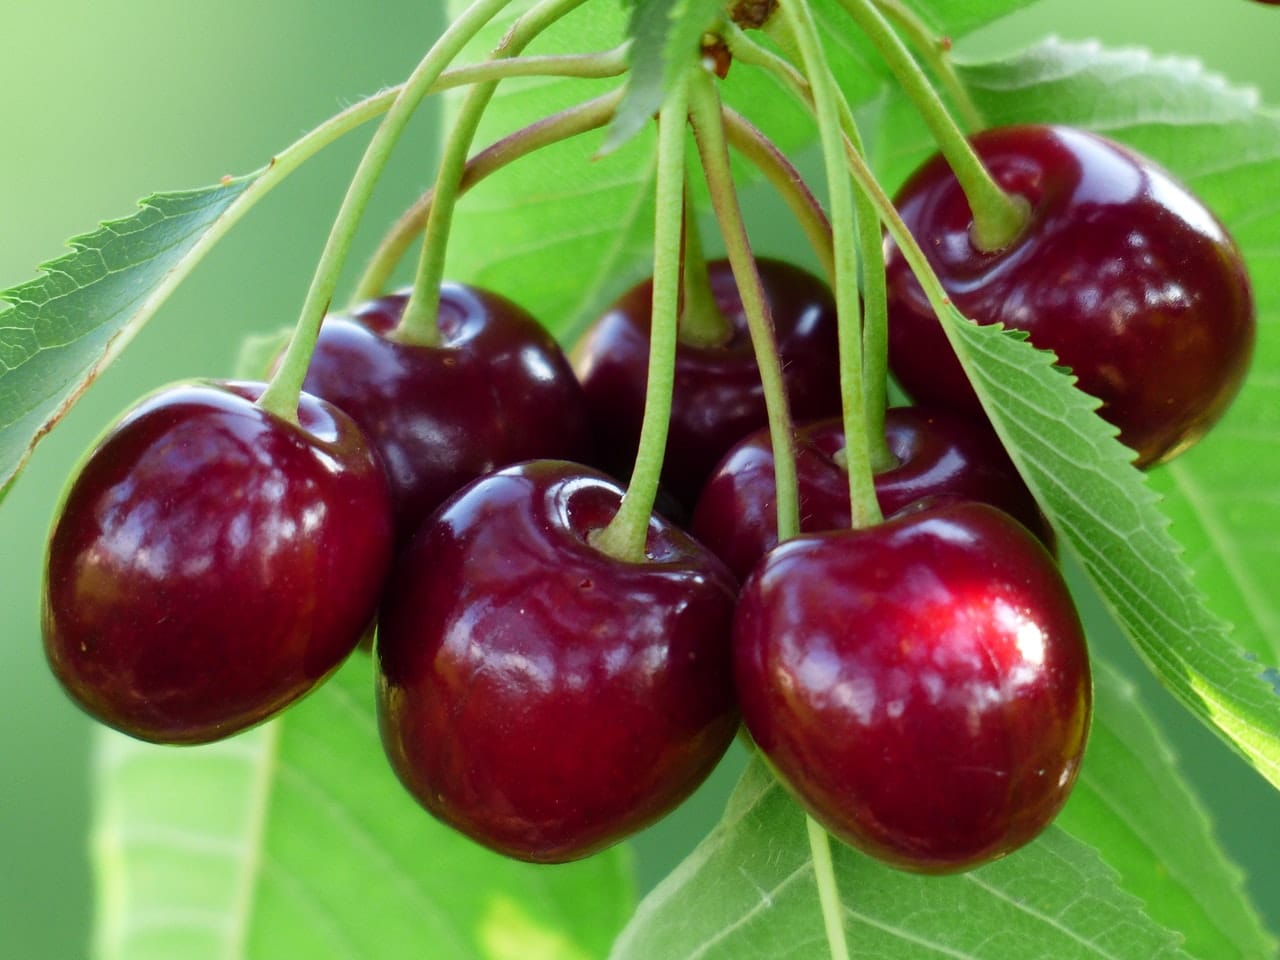 When to plant a cherry tree